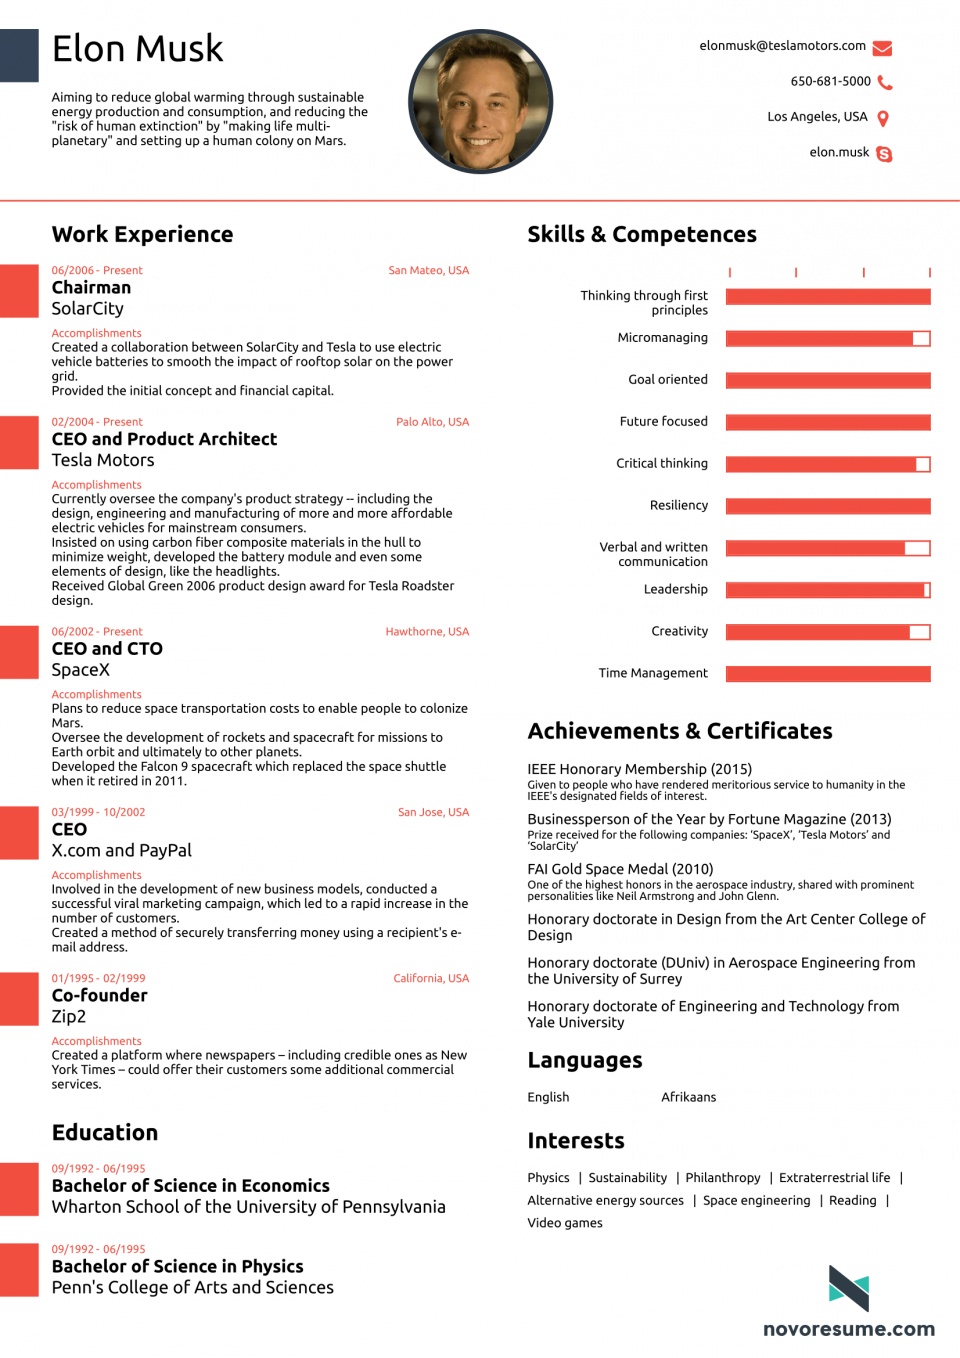 this resume for elon musk proves you never need to use more than one page